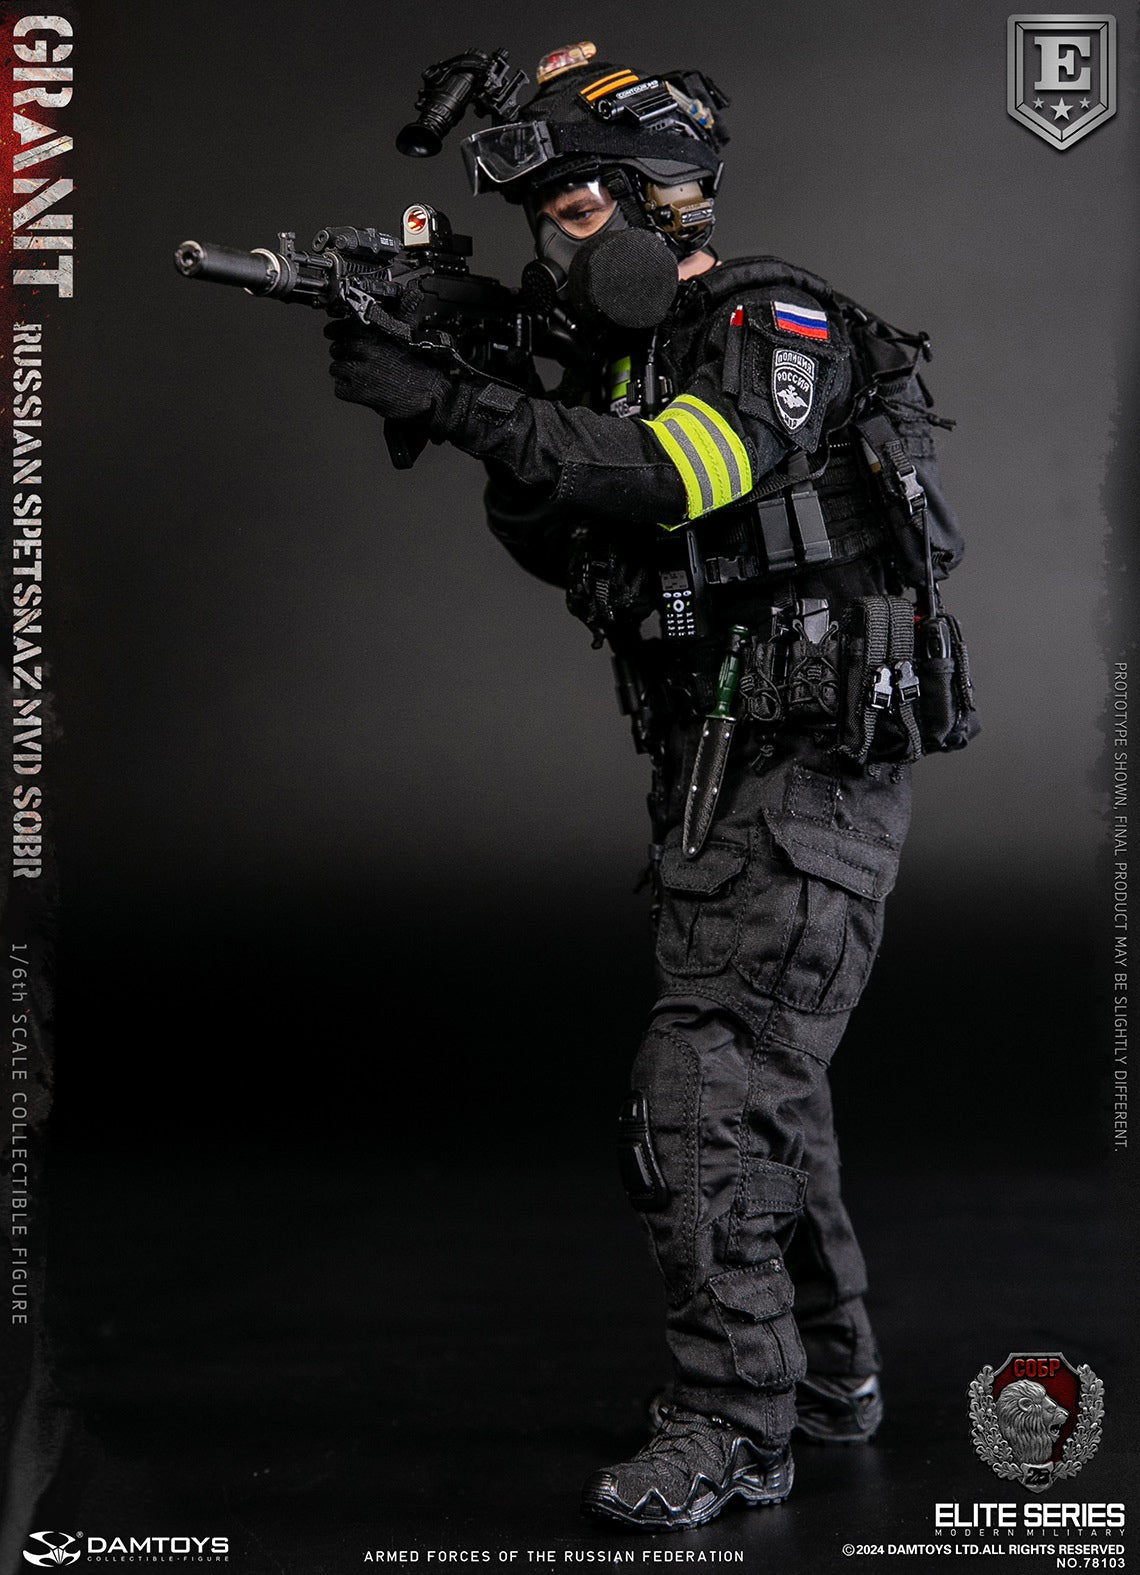 Damtoys - 78103 - Elite Series - Armed Forces of the Russian Federation: SPETSNAZ MVD SOBR Granit (Elite ed.) (1/6 Scale)